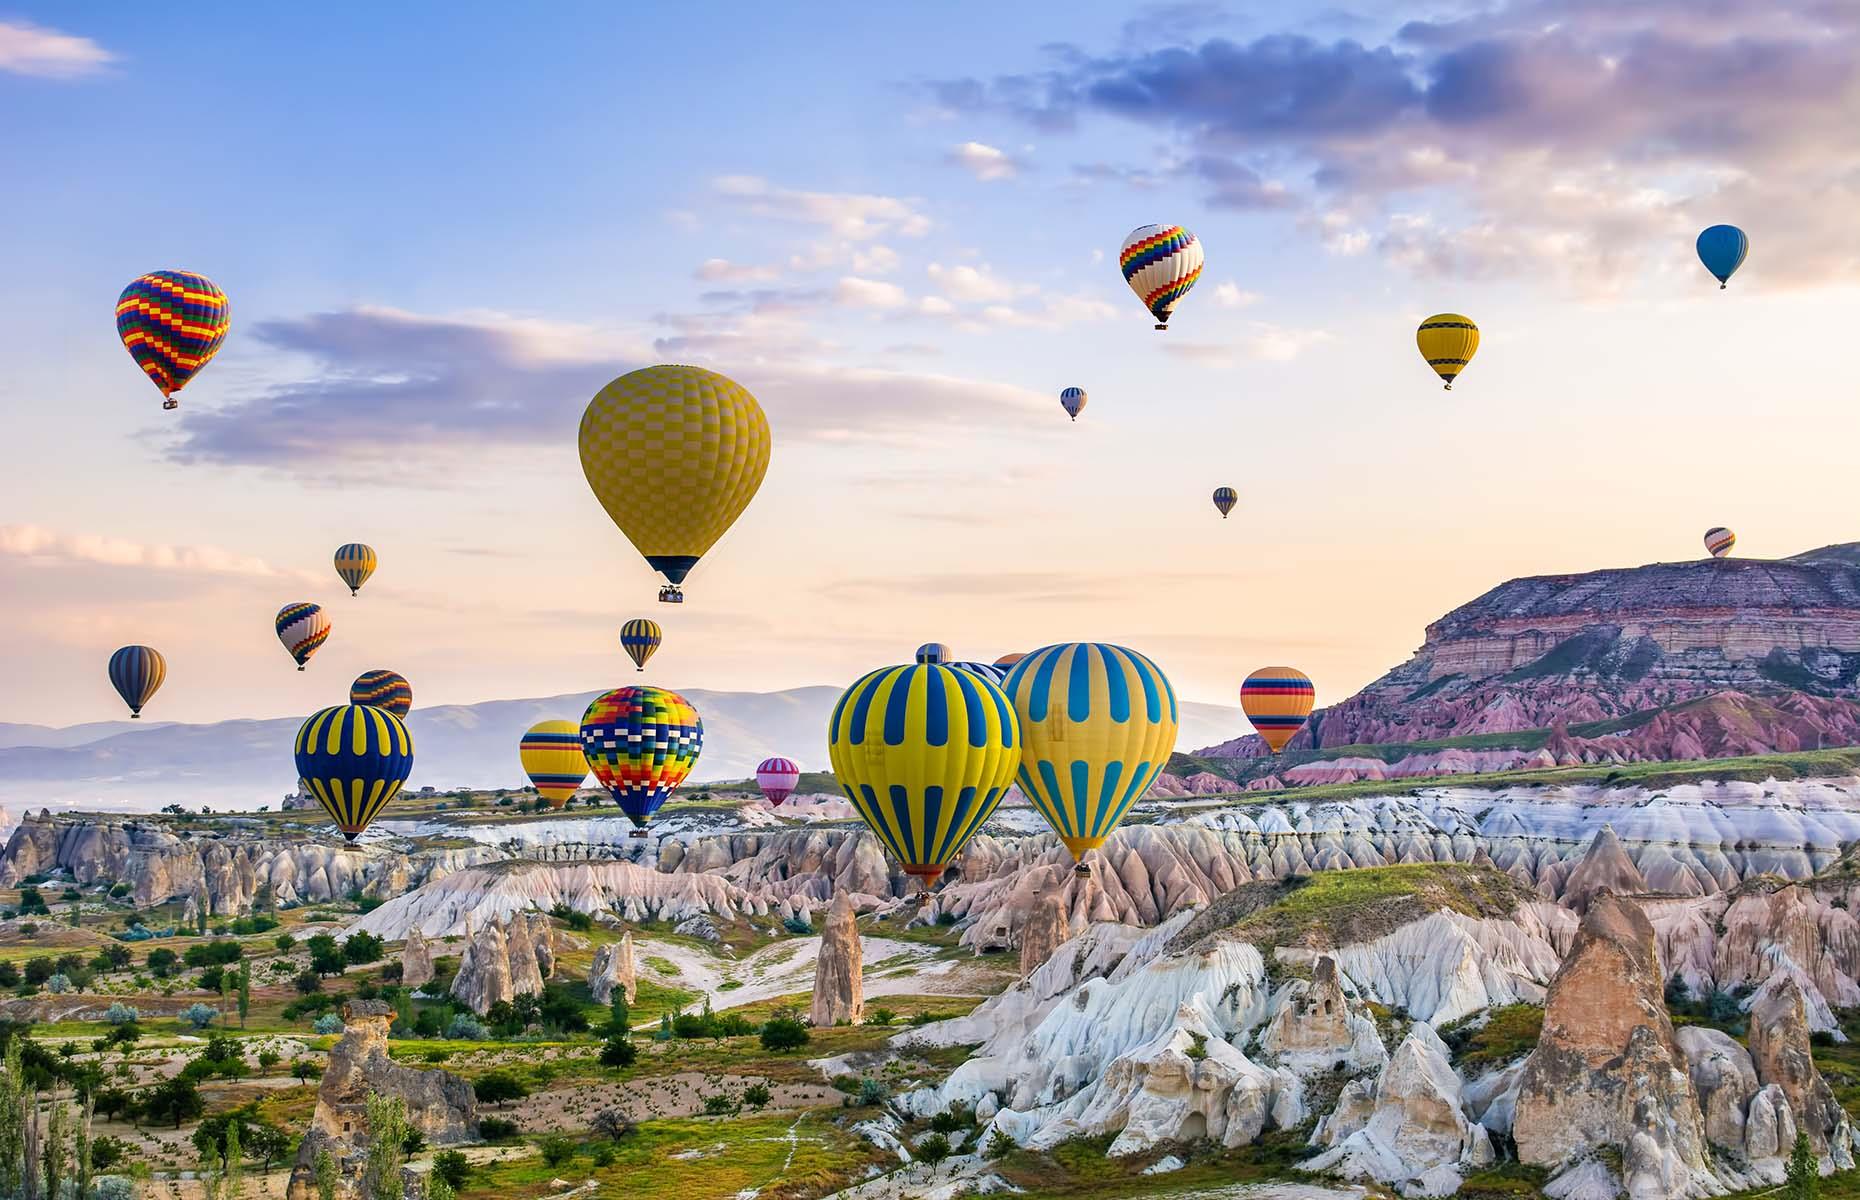 A group of brightly-colored hot air balloons are seen here gliding over the historic landscape of Cappadocia in central Turkey. The unique rock formations in this region have been shaped by erosion and volcanic activity, and are known as fairy chimneys. Thanks to the unusual landscape below, Cappadocia is a popular destination for hot air balloon enthusiasts as well as those who wish to marvel at the rocks from above.